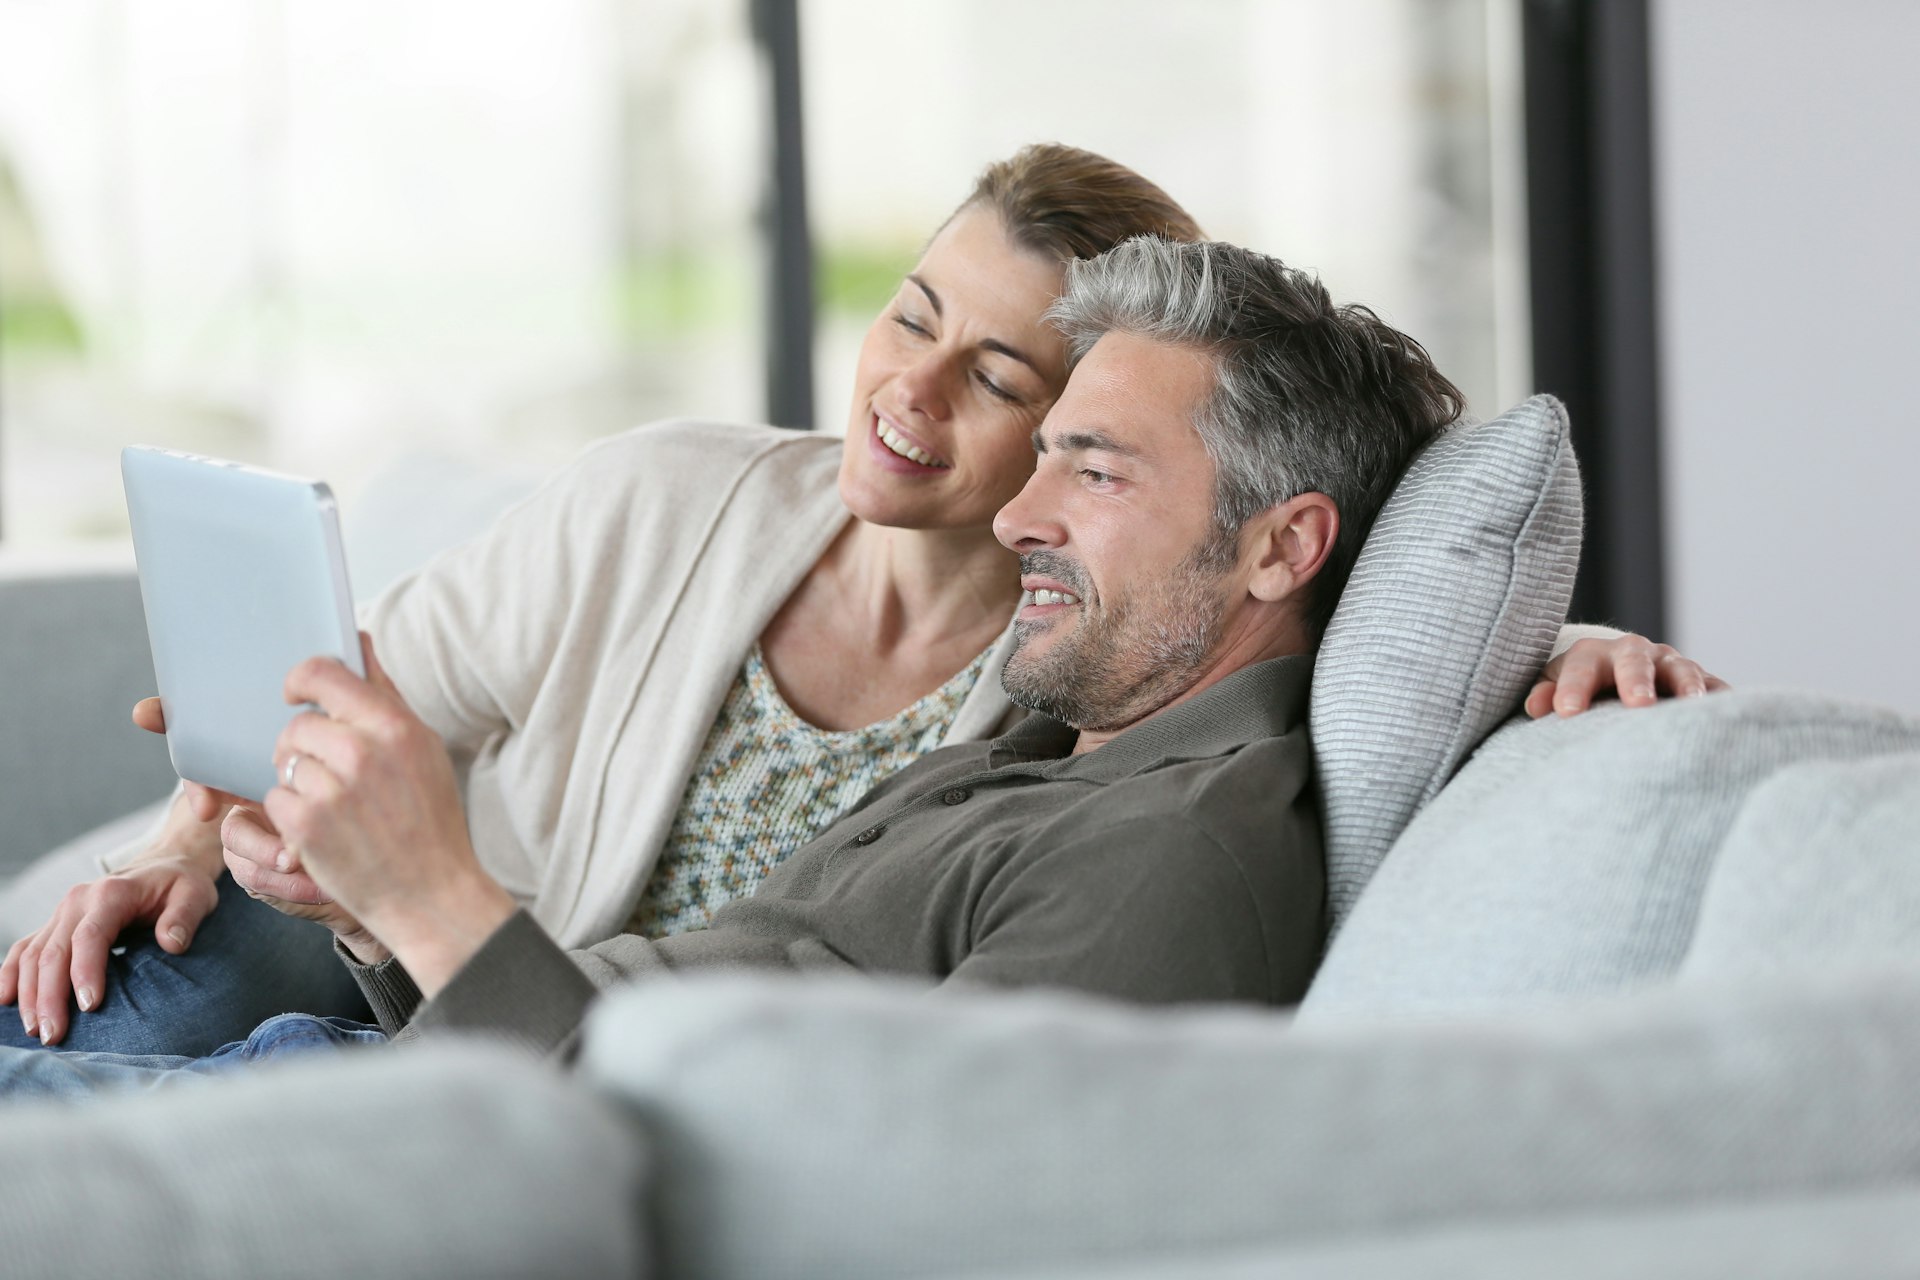 Couple of landlords relaxing and smiling while checking their property online